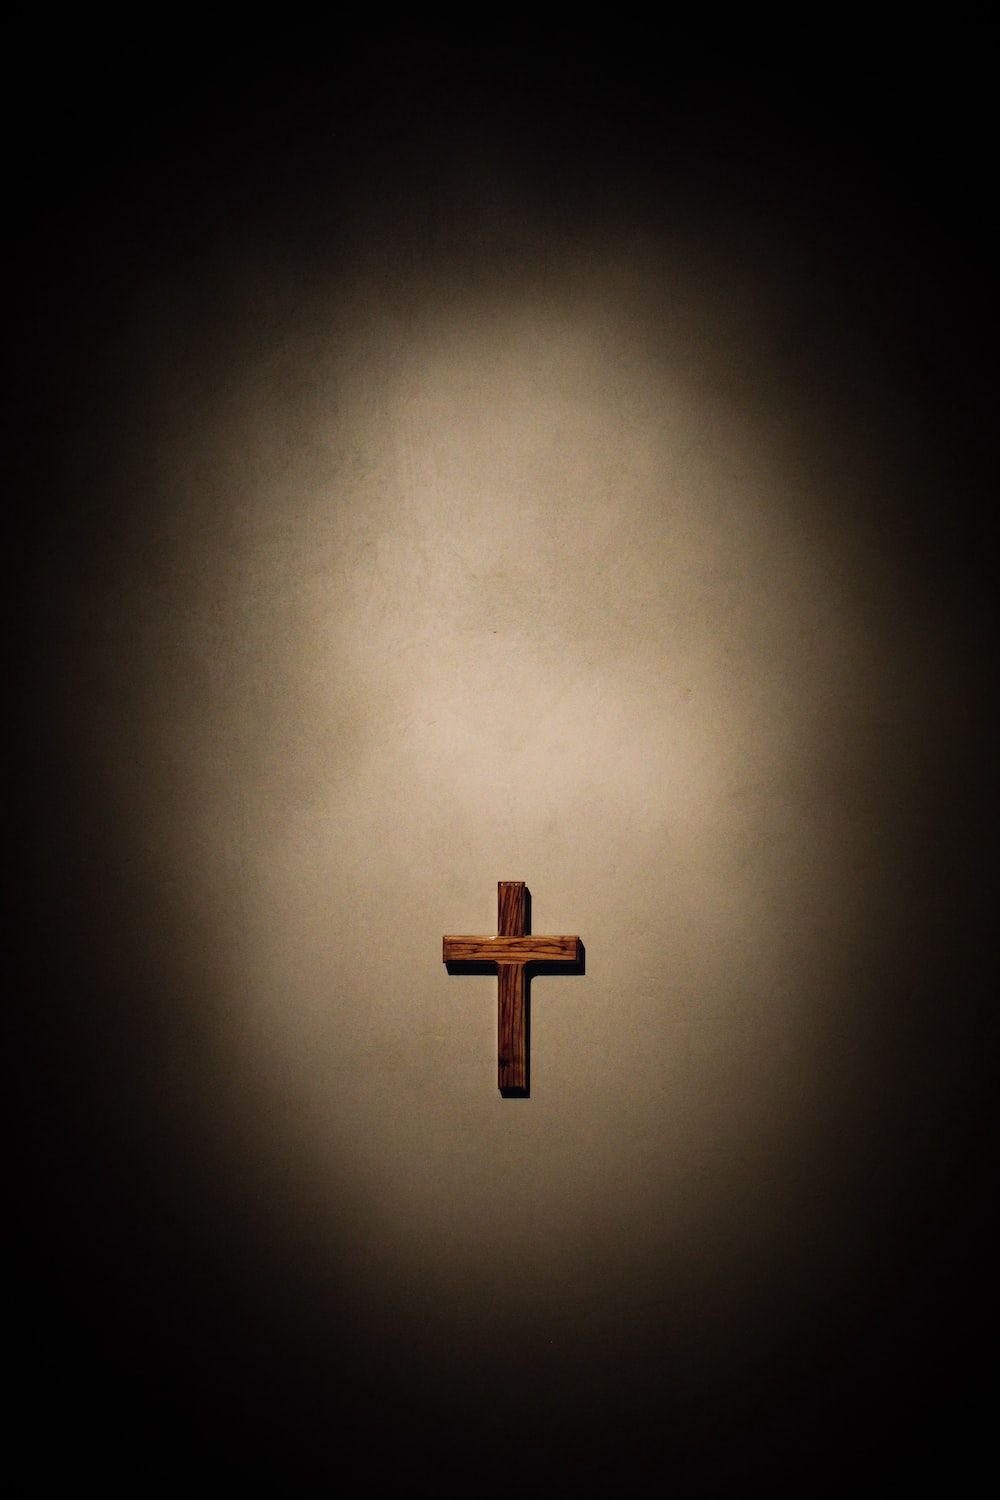 A cross is in the middle of an image - Cross